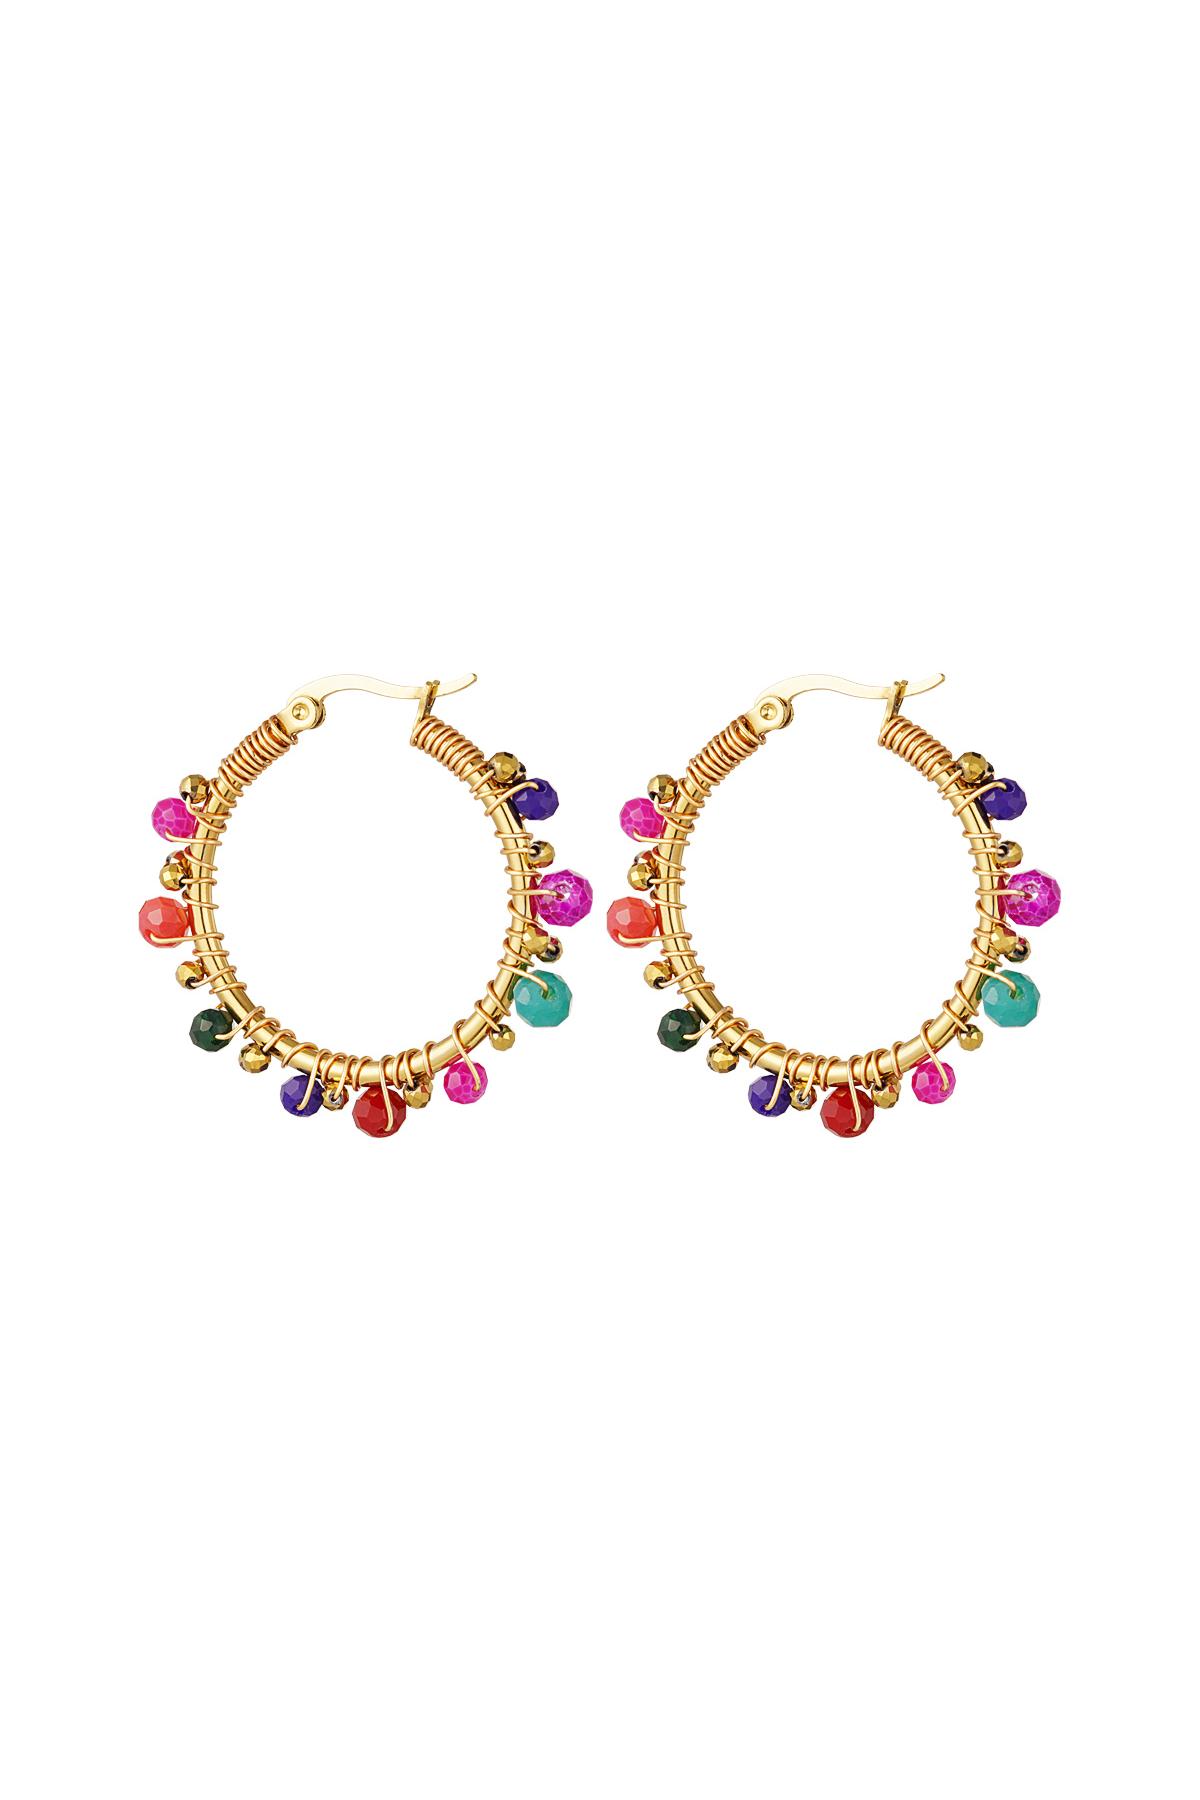 Hoops colored beads Gold Stainless Steel h5 